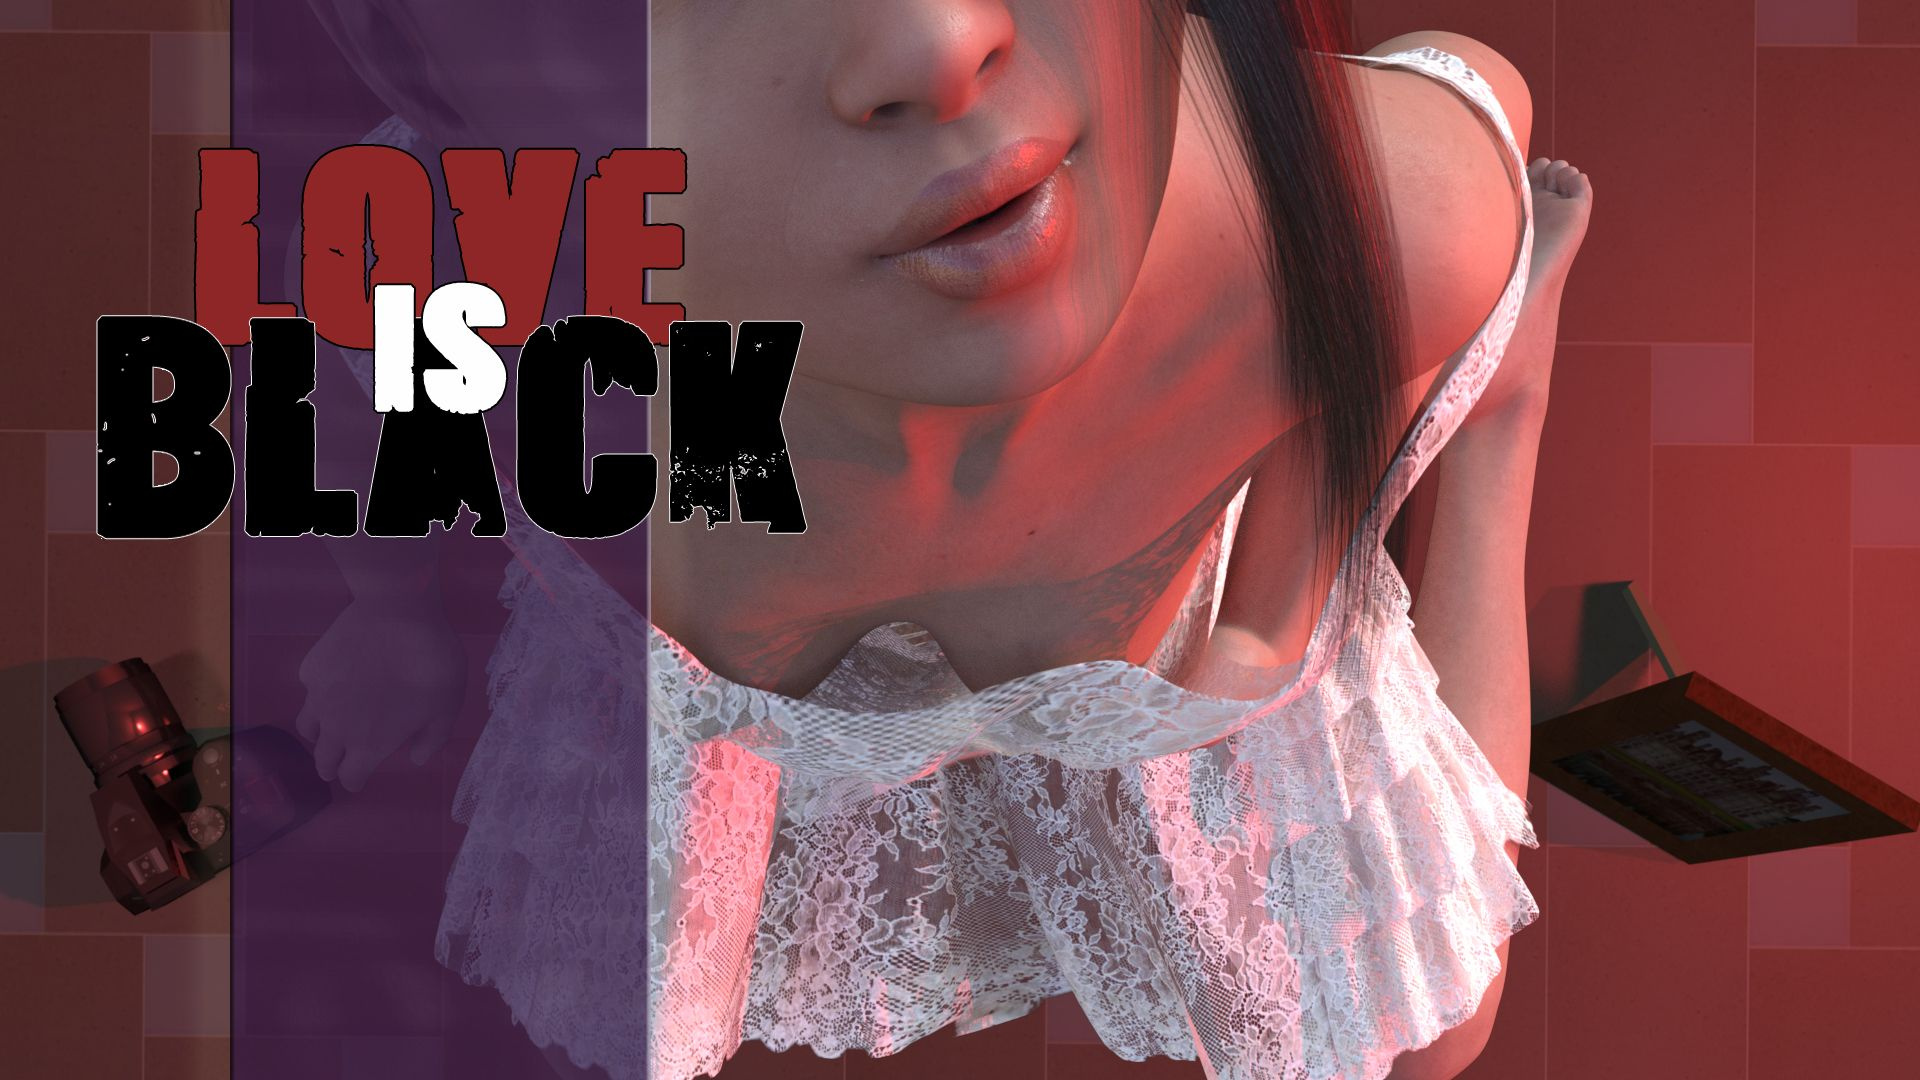 Download LisB - Love is Black v0.5.4.5 (Win/Android/Mac)